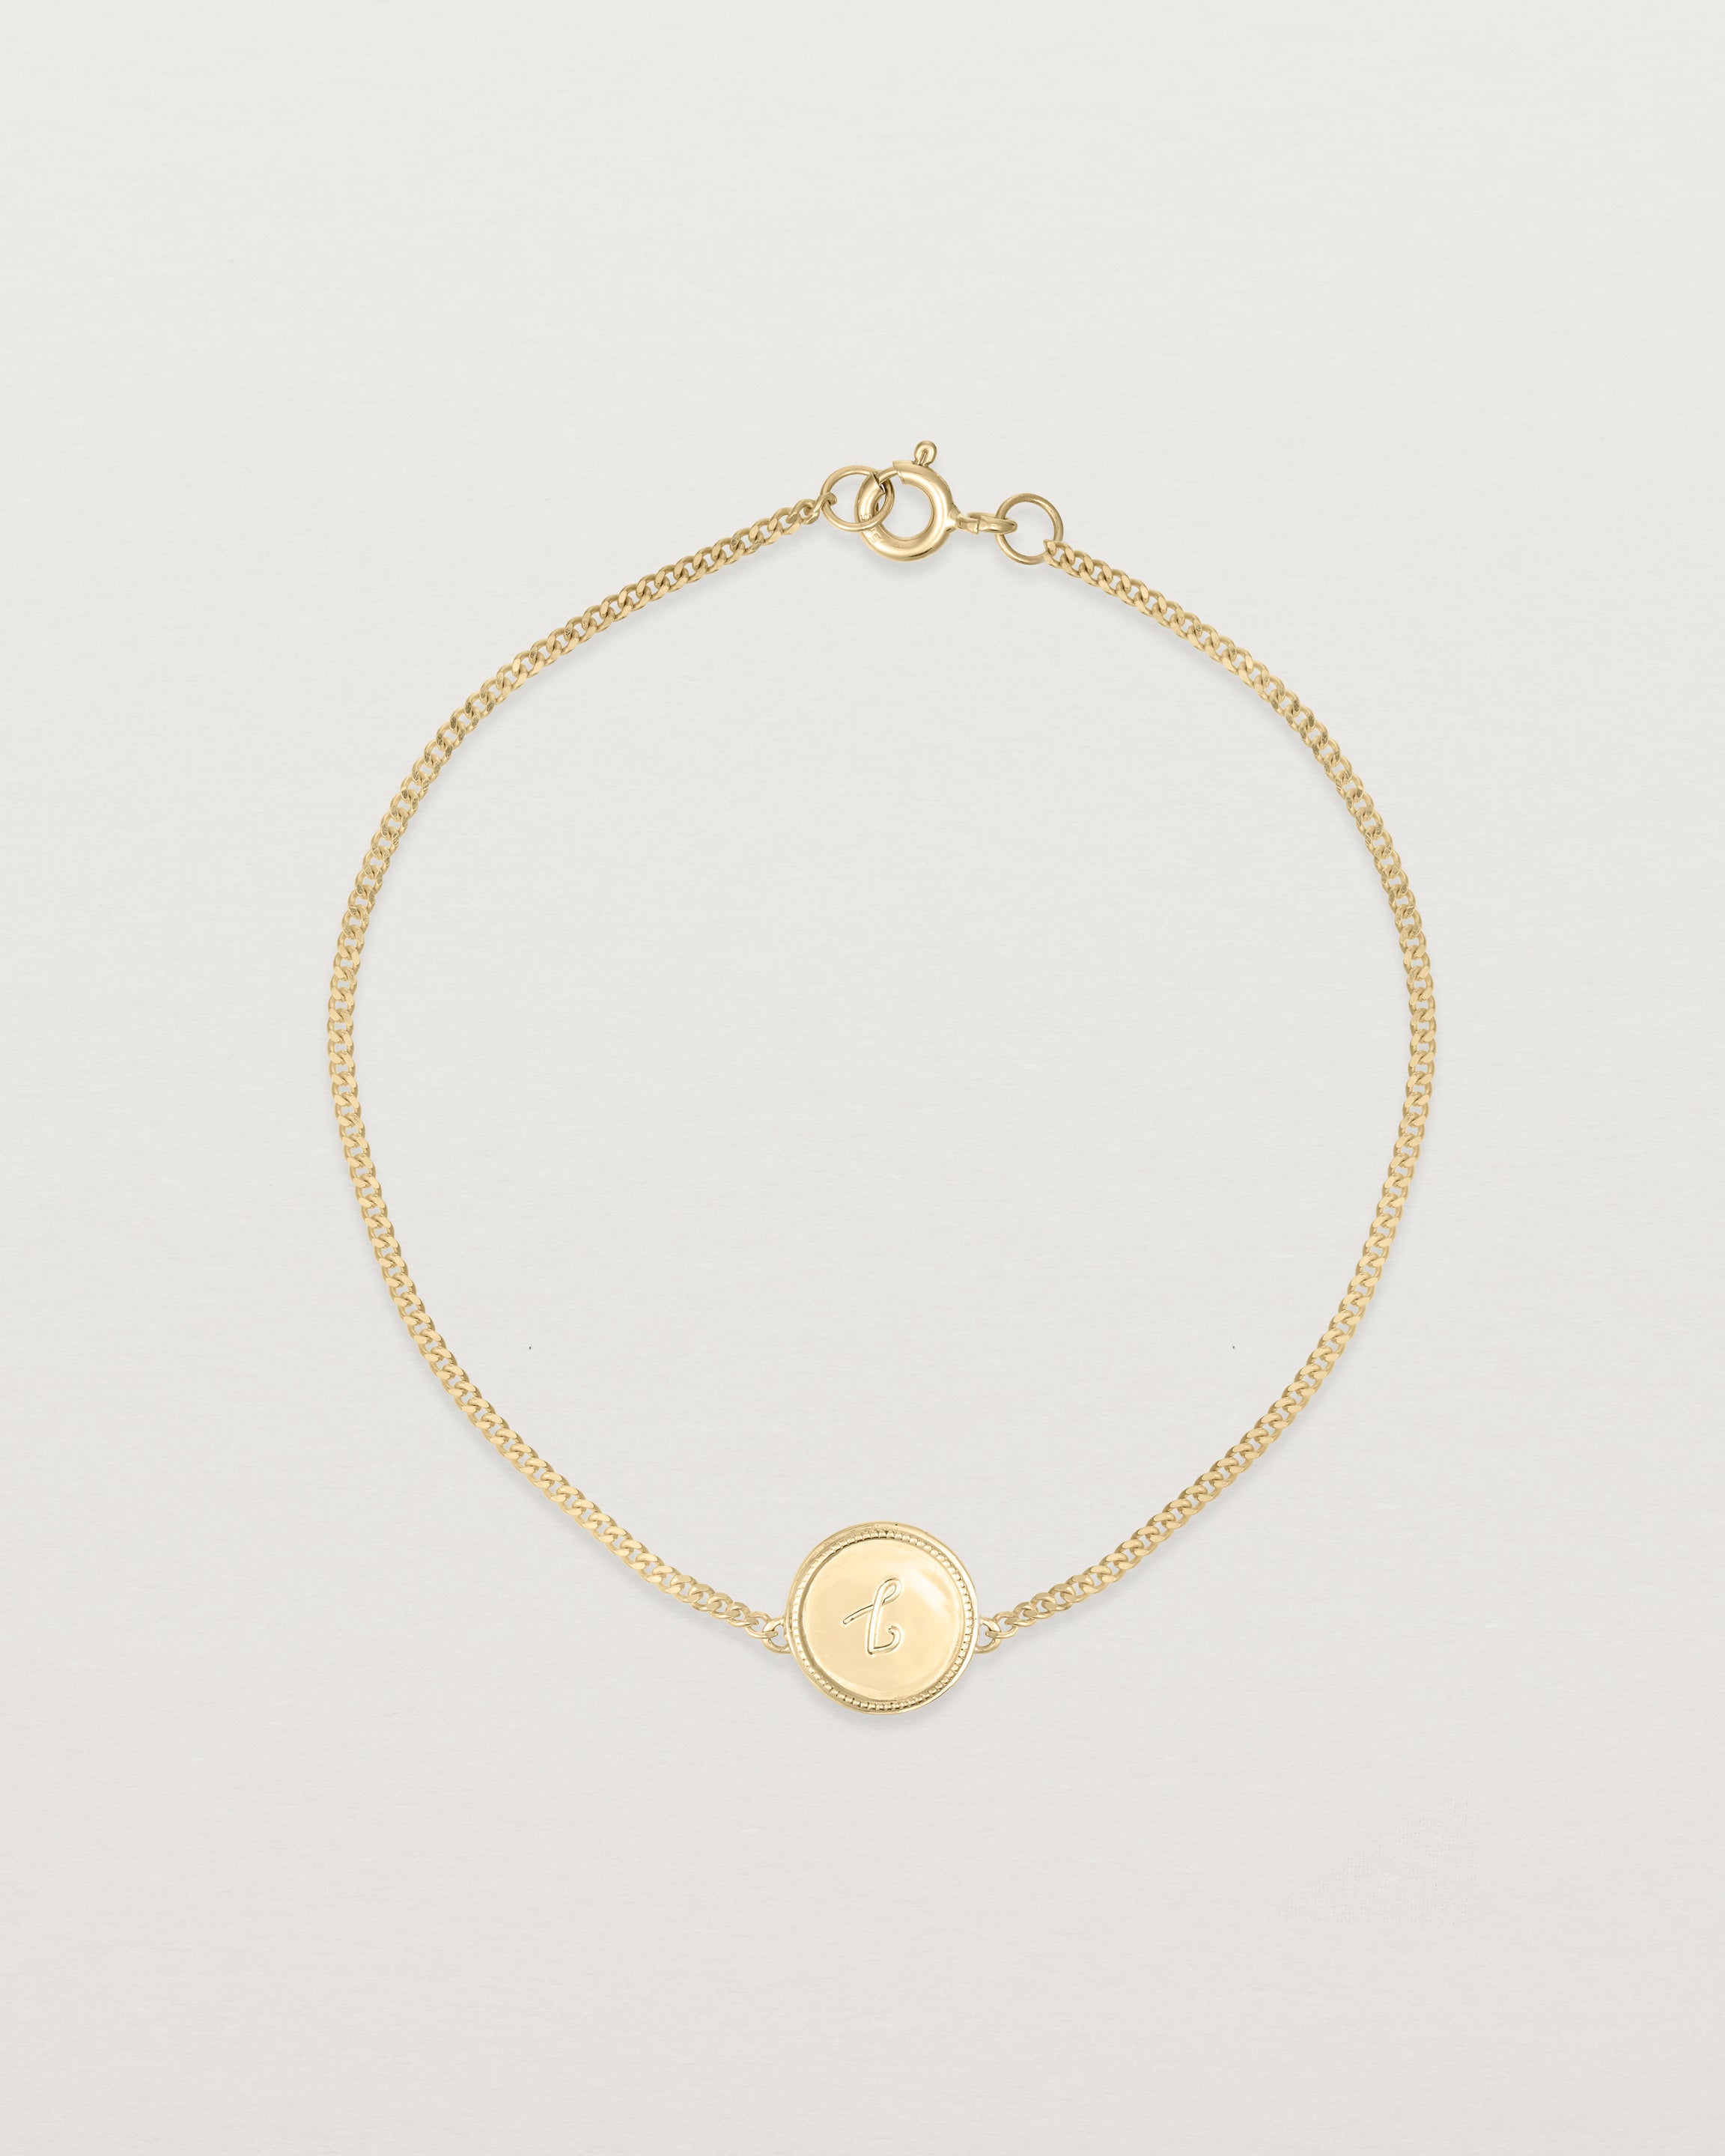 Top down view of the Precious Initial Bracelet in yellow gold.